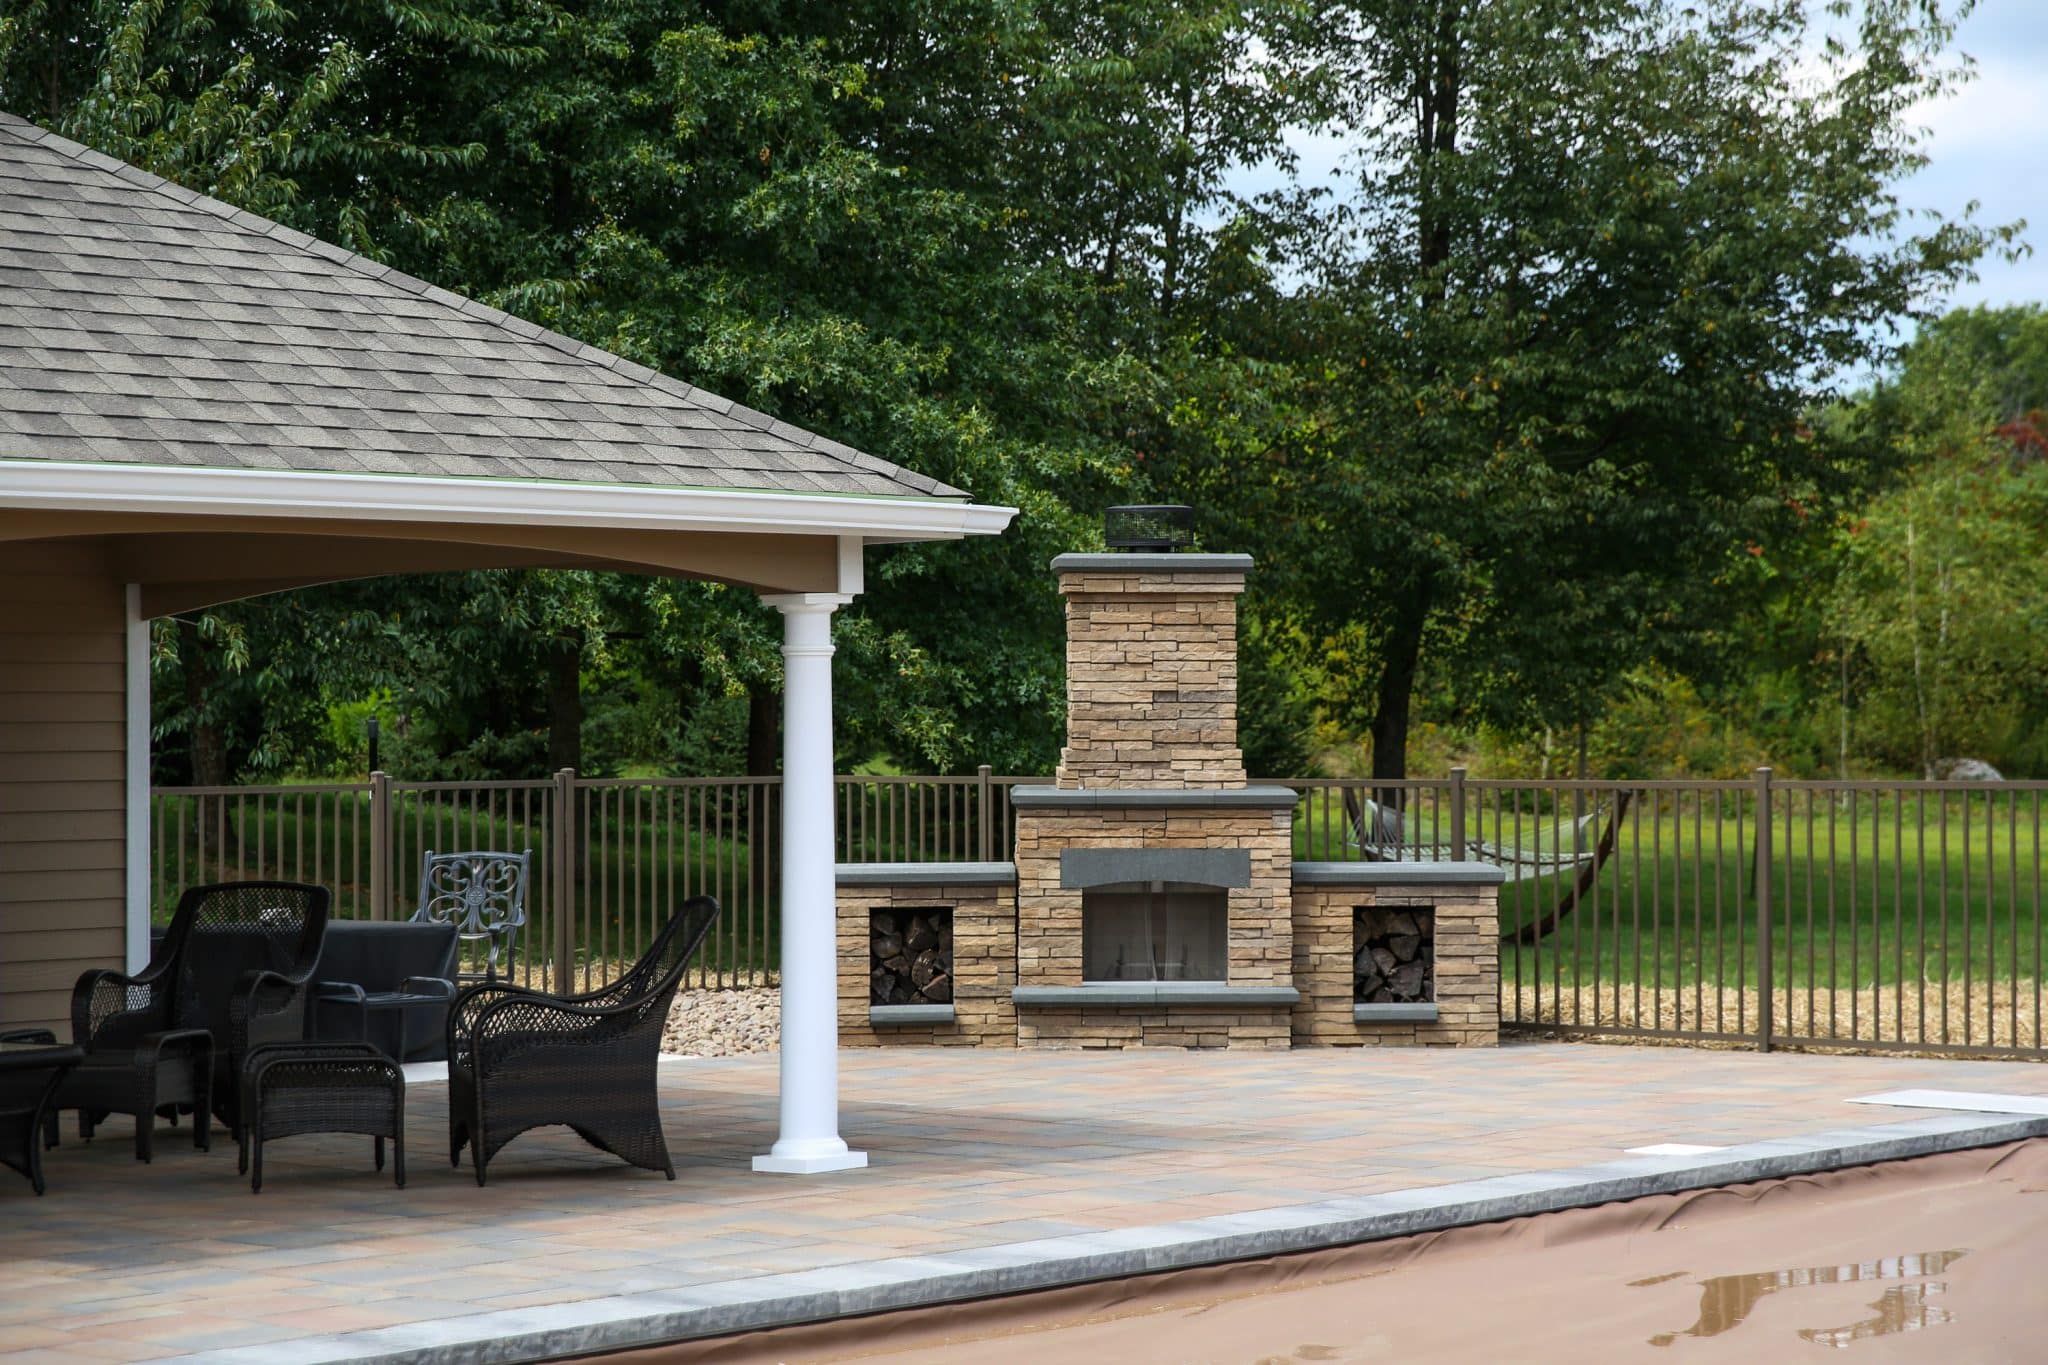 A free-standing precast concrete Belgard fireplace with side woodboxes on a pool patio in front of a fence next to a cabana.